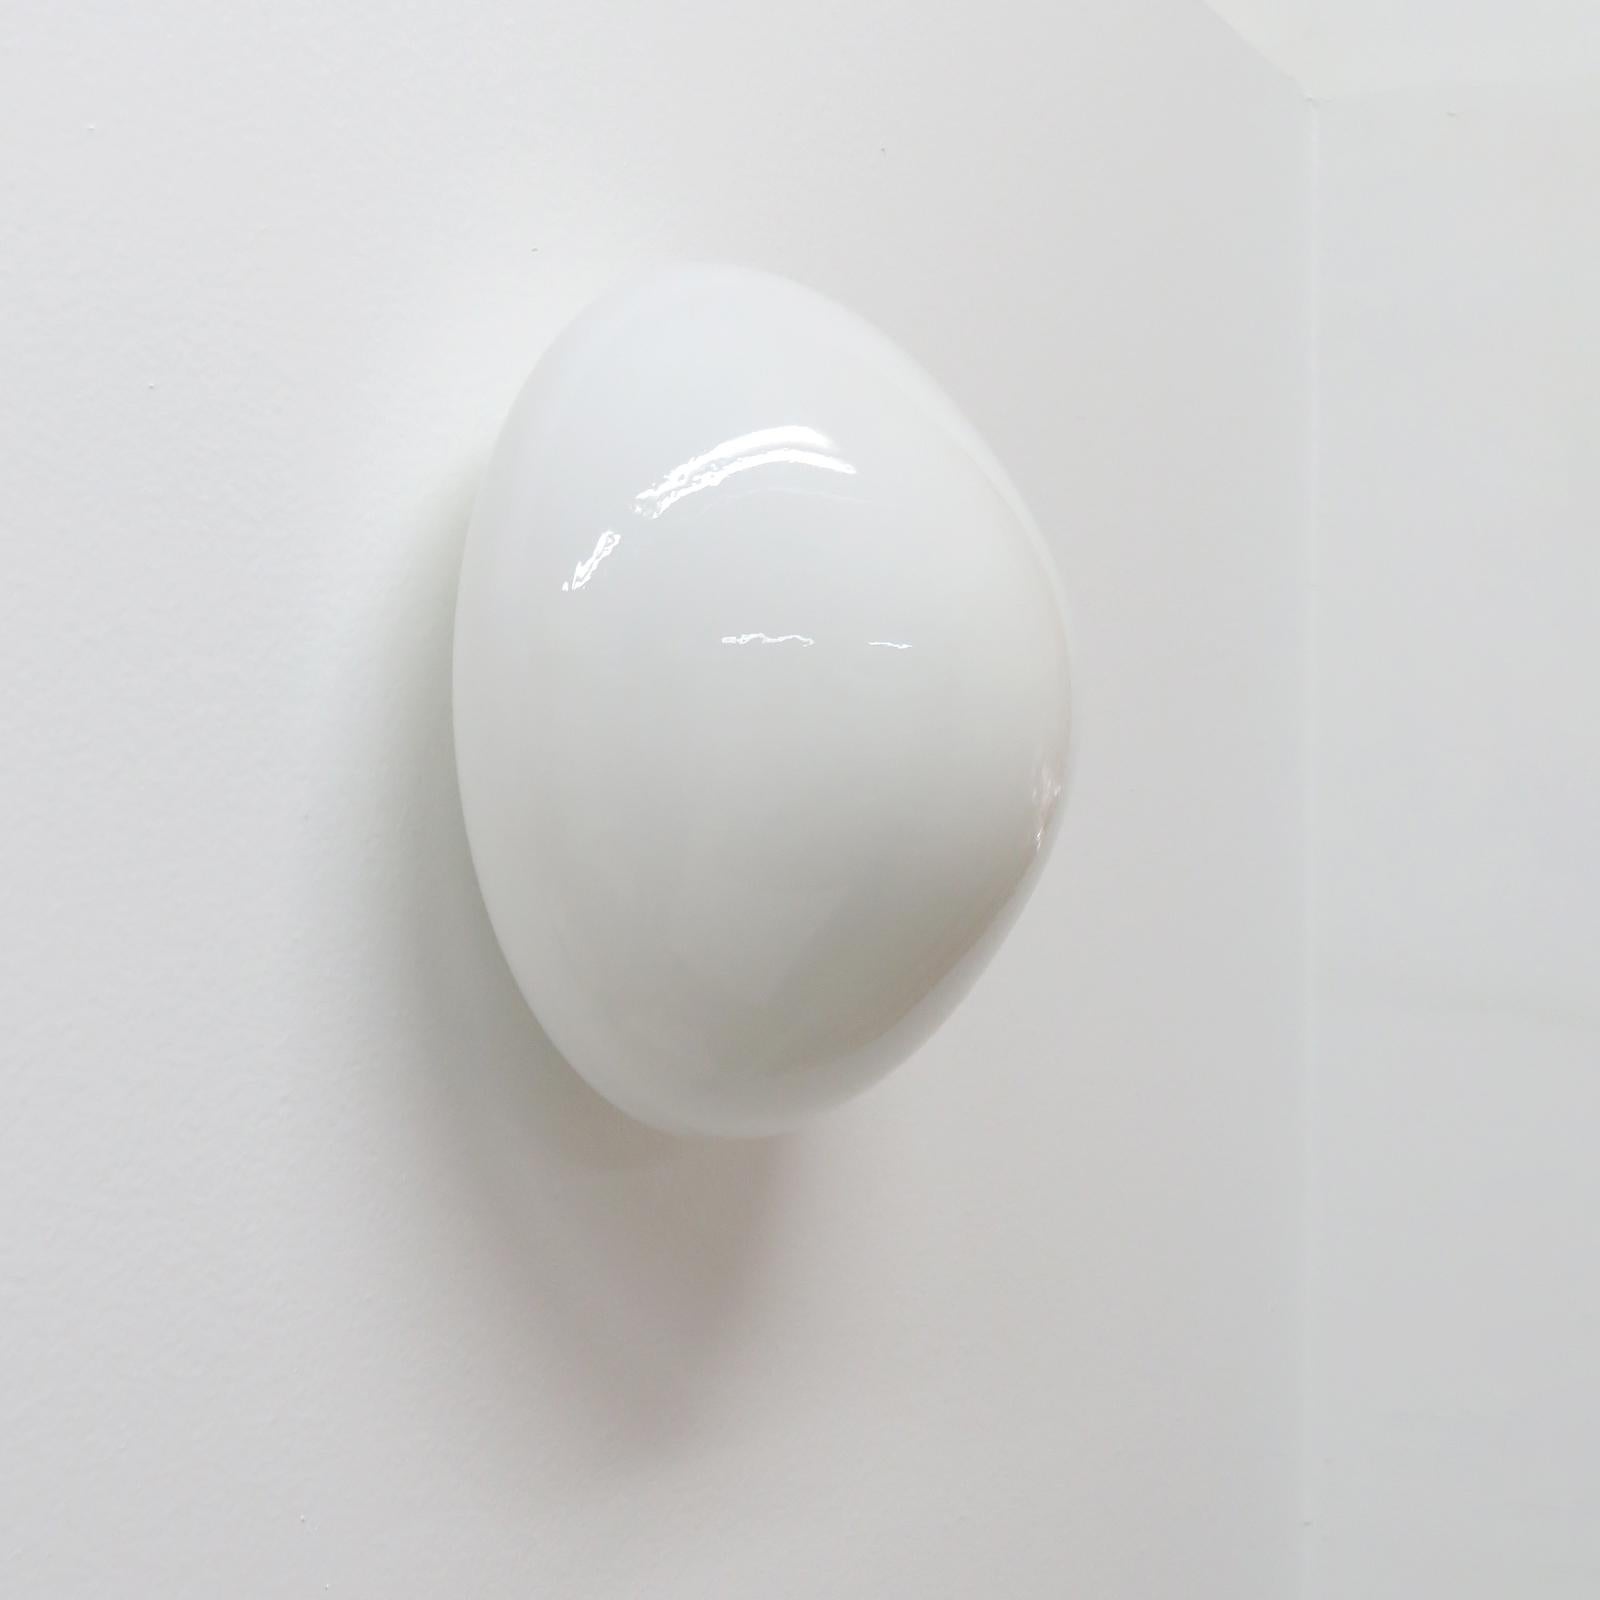 wonderful round wall lights model NWL 961, designed by Wilhelm Wagenfeld for Lindner, 1950 with drop shaped, molded white glass shades and porcelain base - perfect for any bathroom. One E26 socket, max. wattage 60w or LED equivalent, wired for US